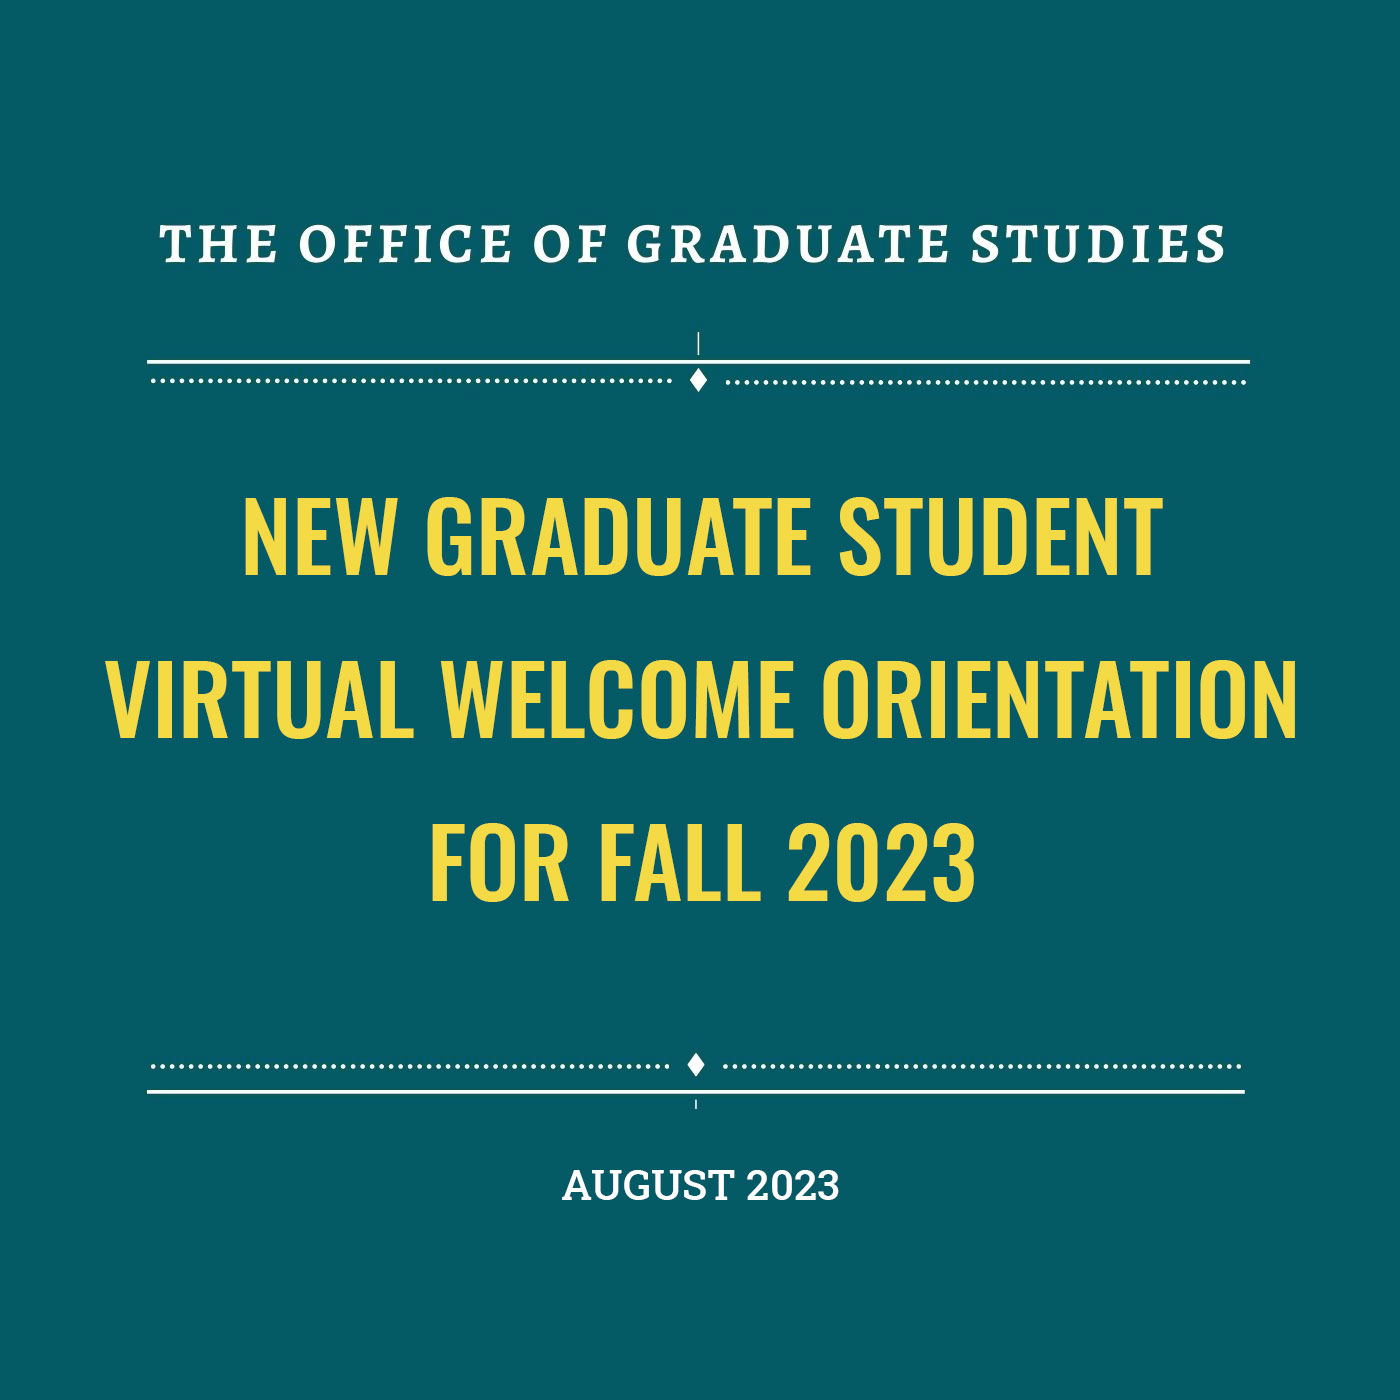 New Graduate Student Virtual Welcome Orientation for Fall 2023